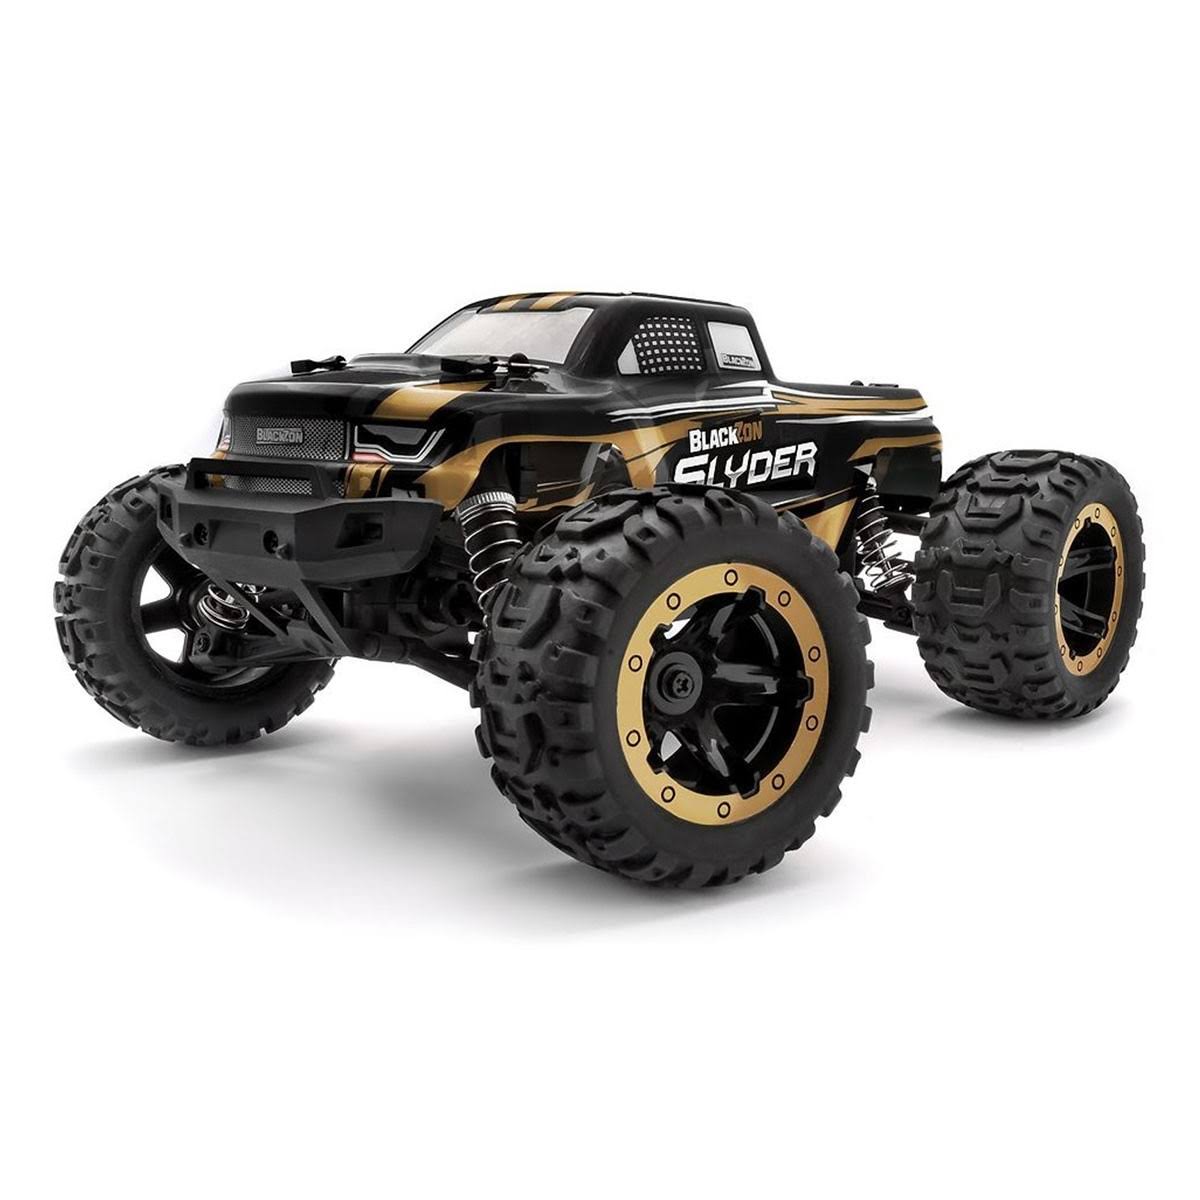 BlackZon Slyder 1/16th Electric Monster Truck - RTR 4WD Gold